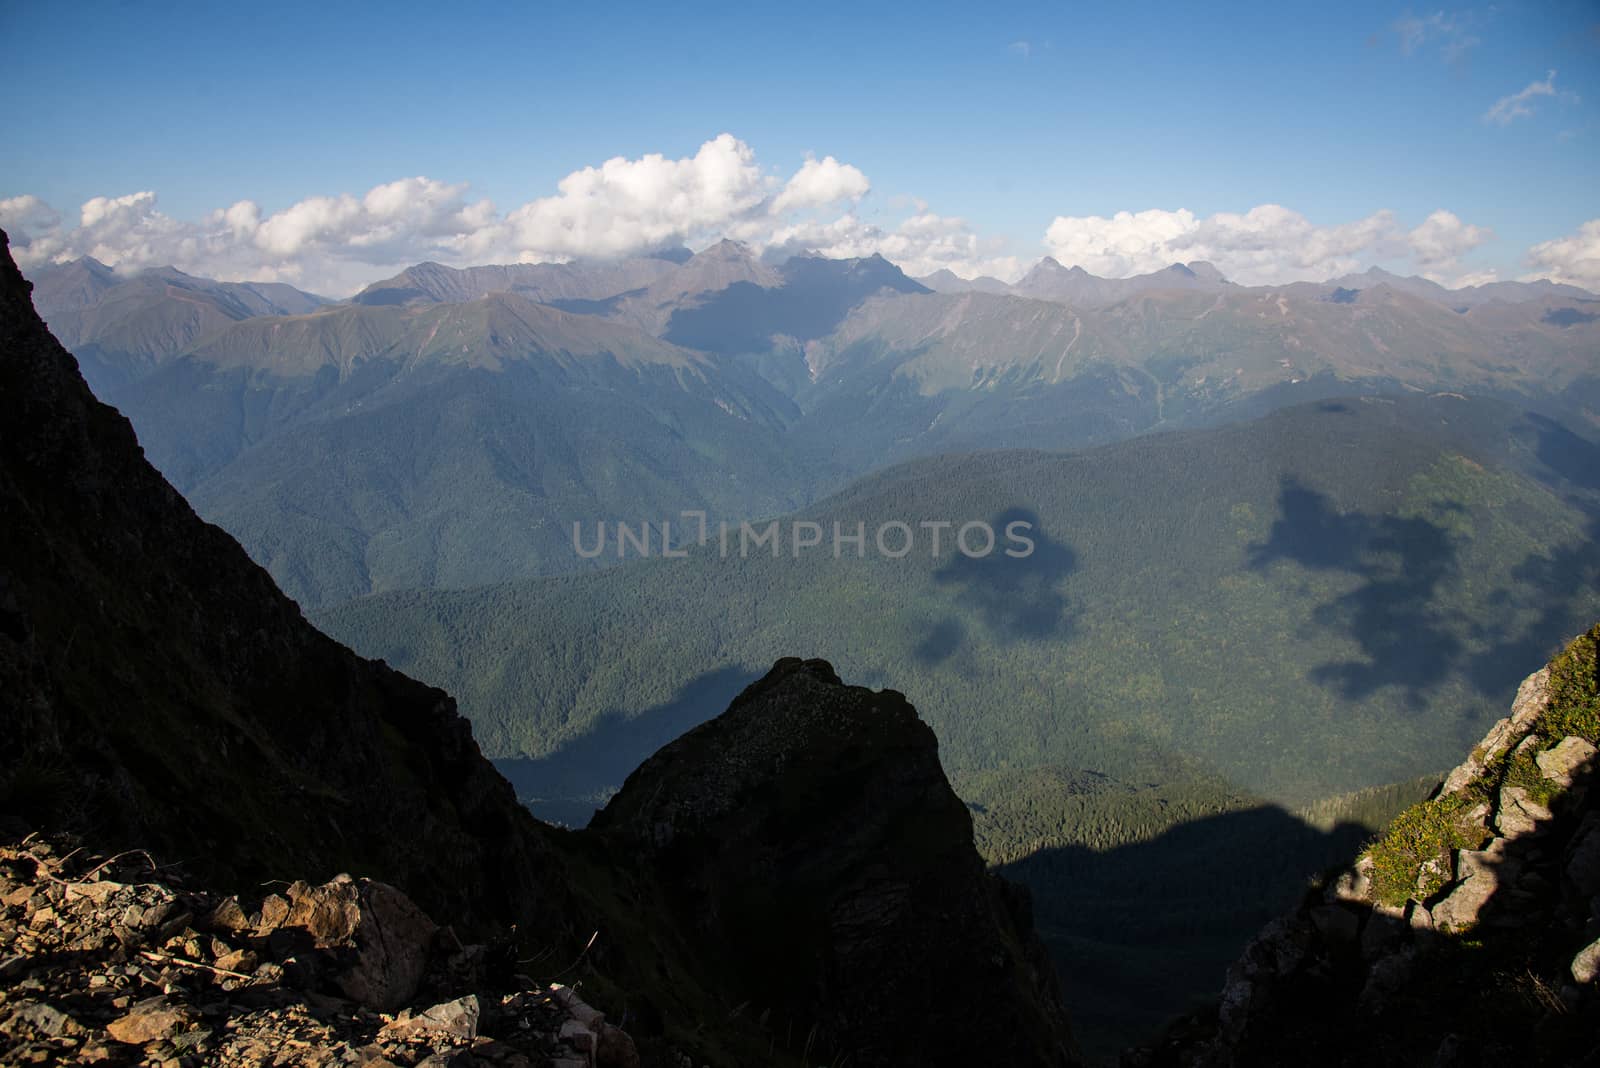 The magnificent mountain scenery by Viktoha